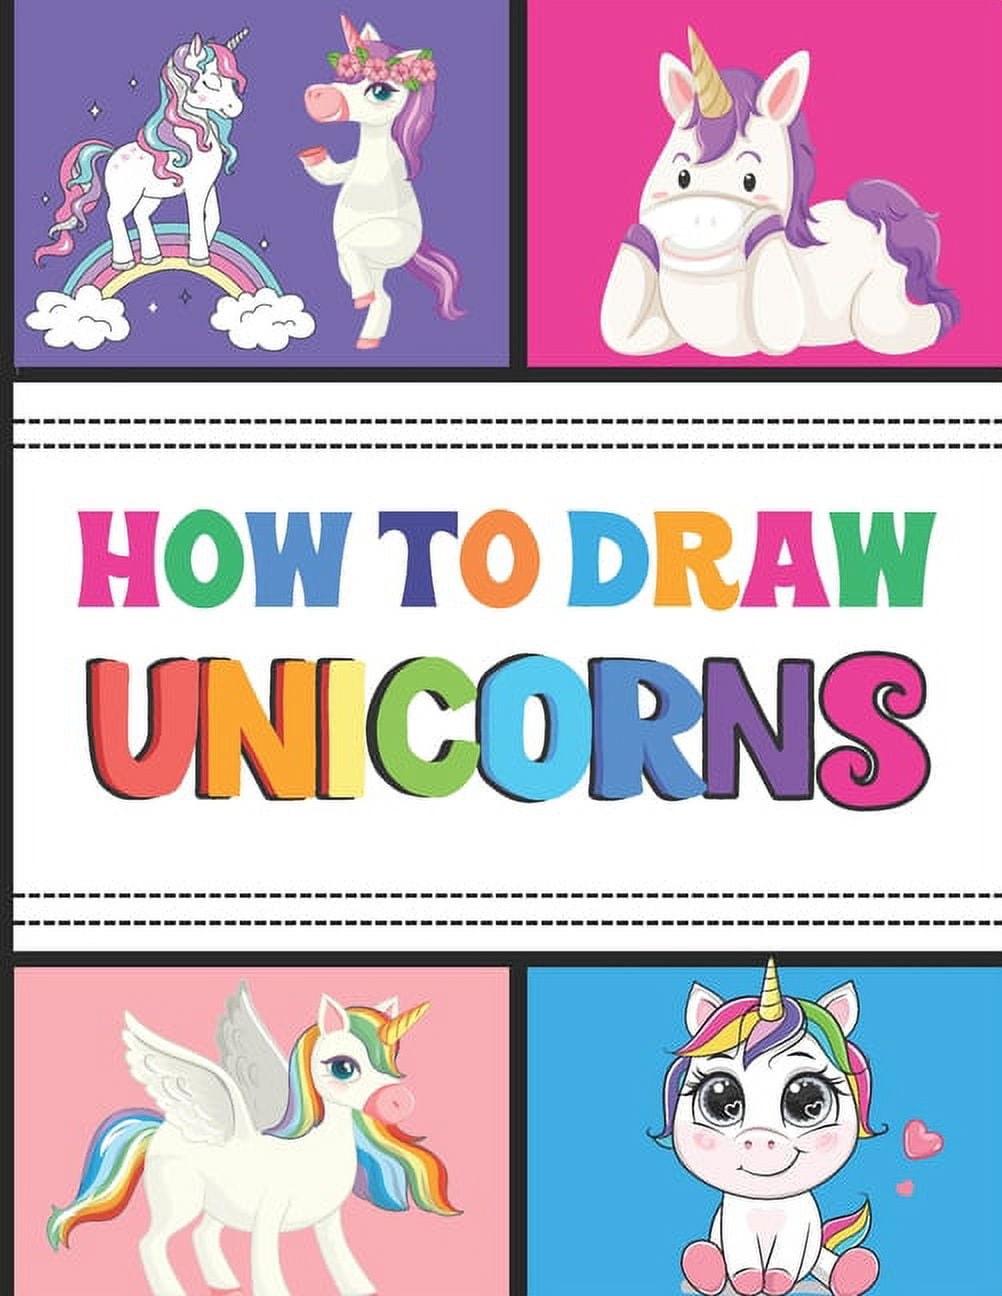 How to Draw Cute Stuff: A Step-by-Step Drawing Guide for Kids